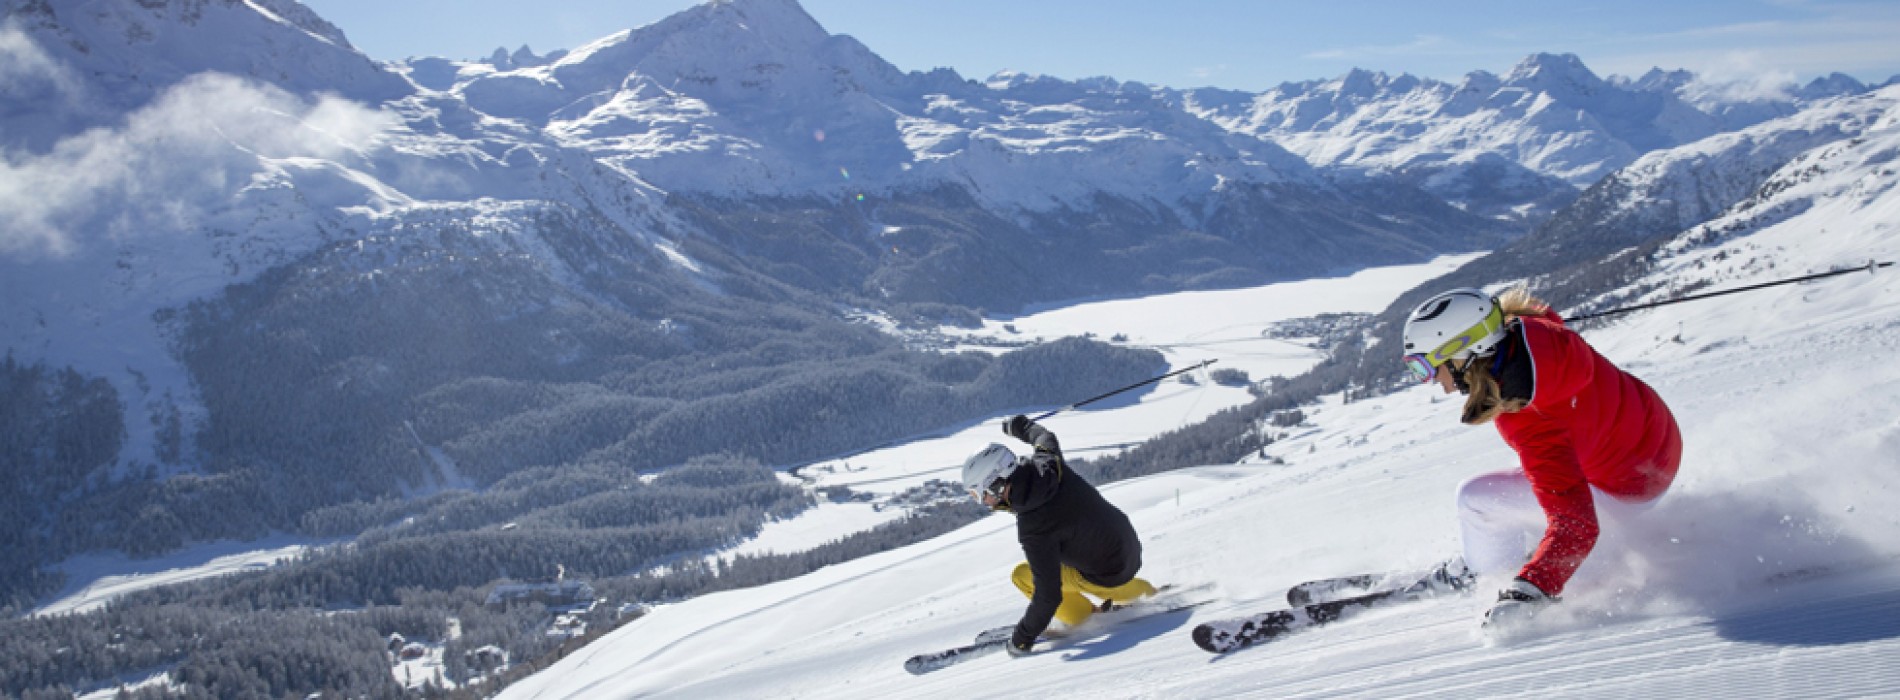 Learn how to Ski in the birthplace of winter tourism, St. Moritz